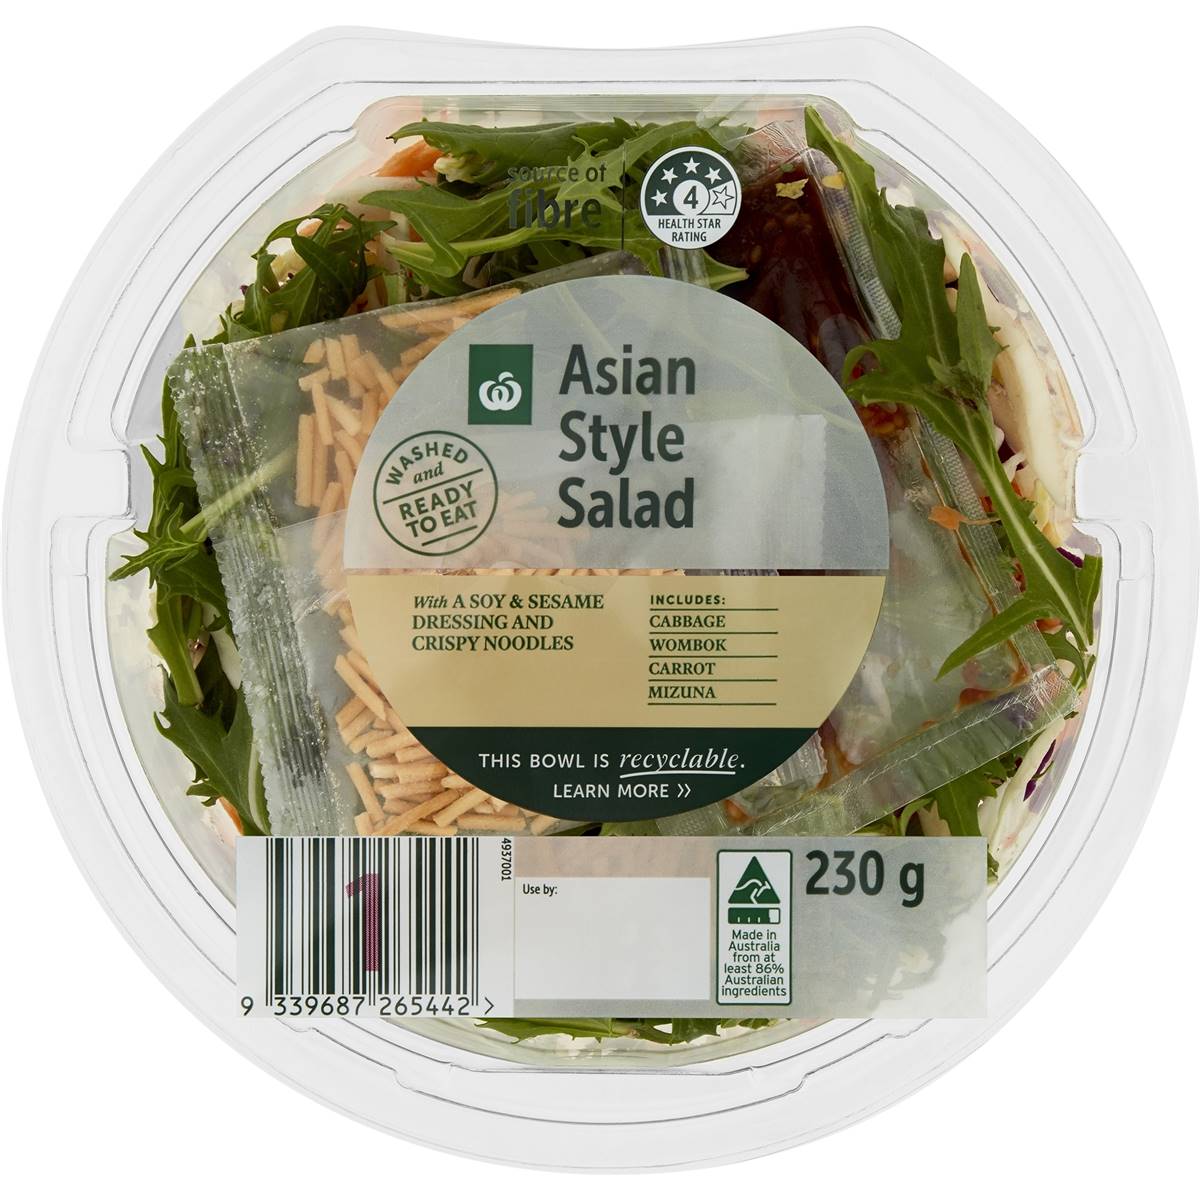 Calories in Woolworths Asian Salad Bowl